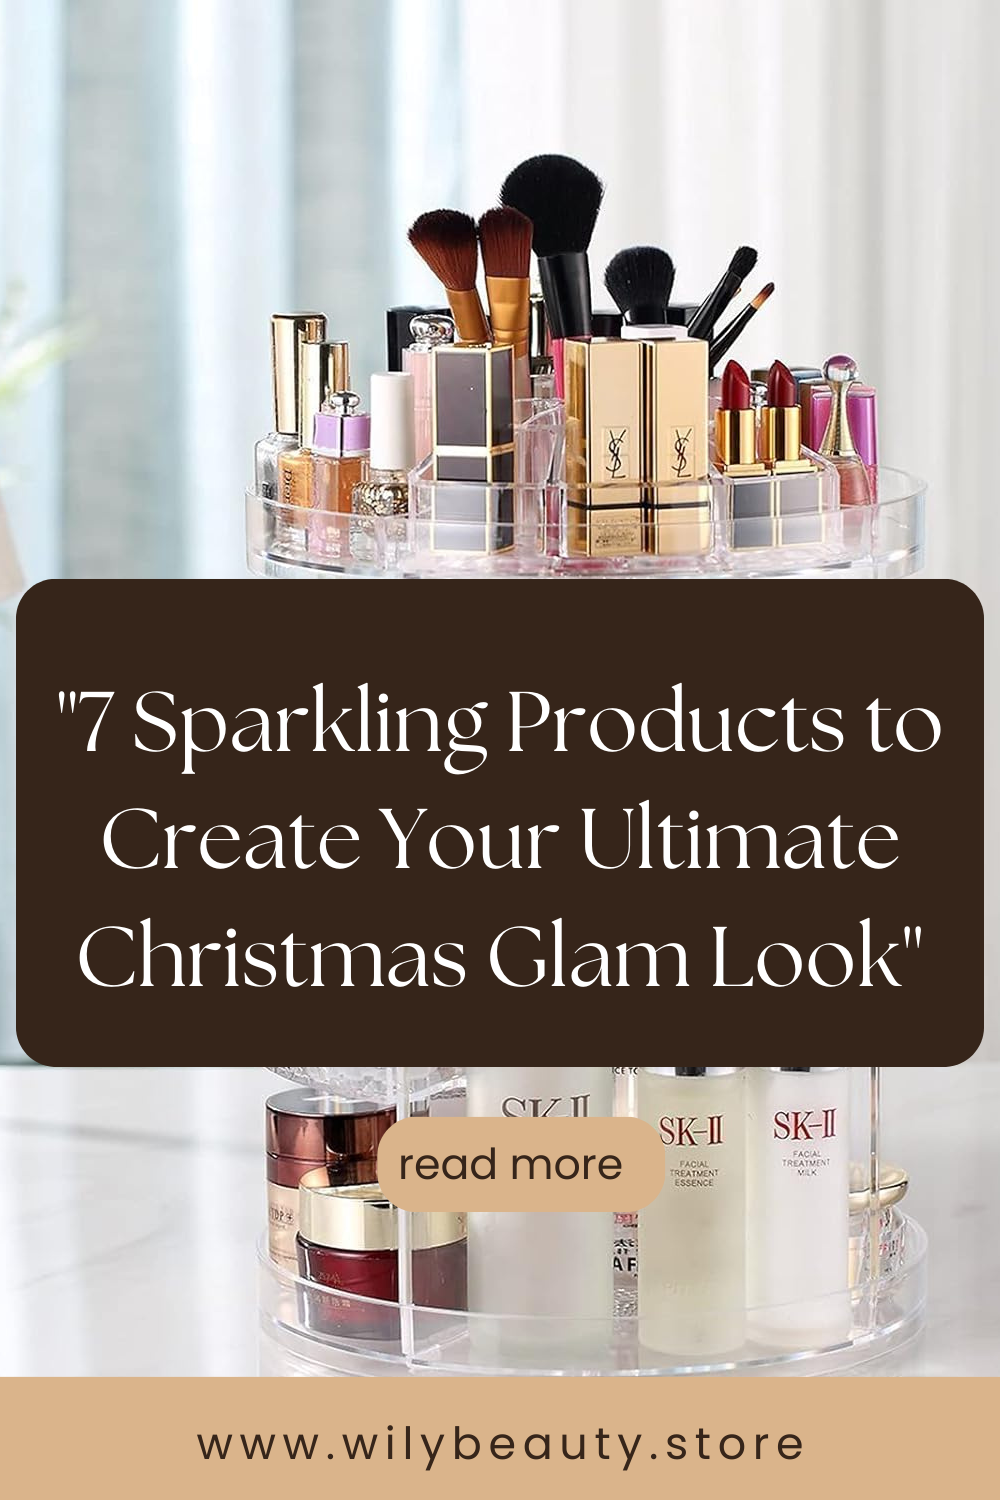 "7 Sparkling Products to Create Your Ultimate Christmas Glam Look"